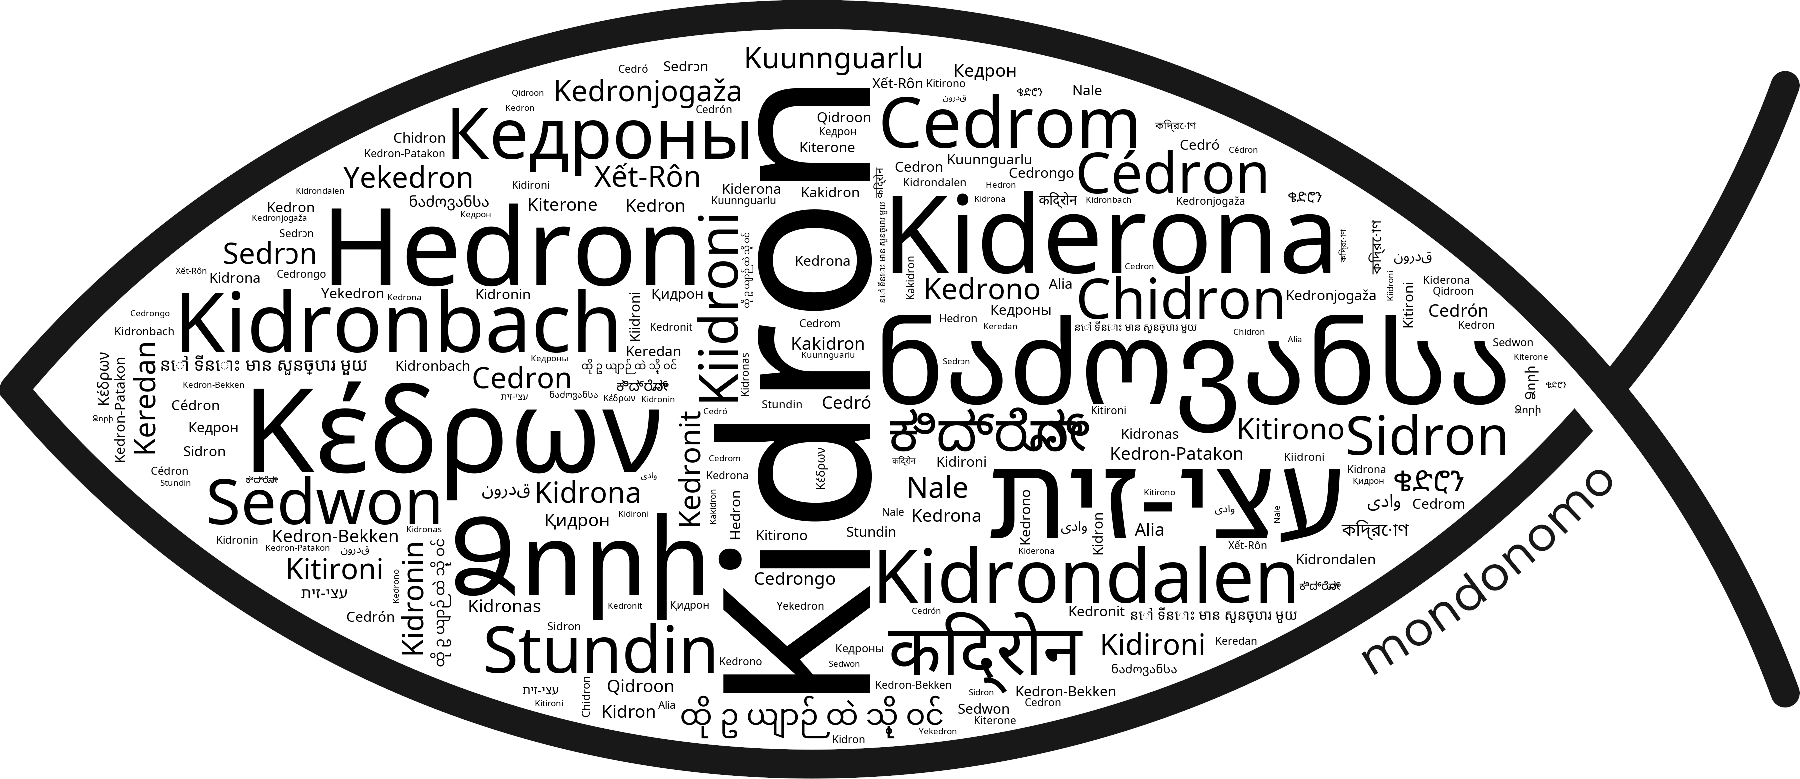 Name Kidron in the world's Bibles